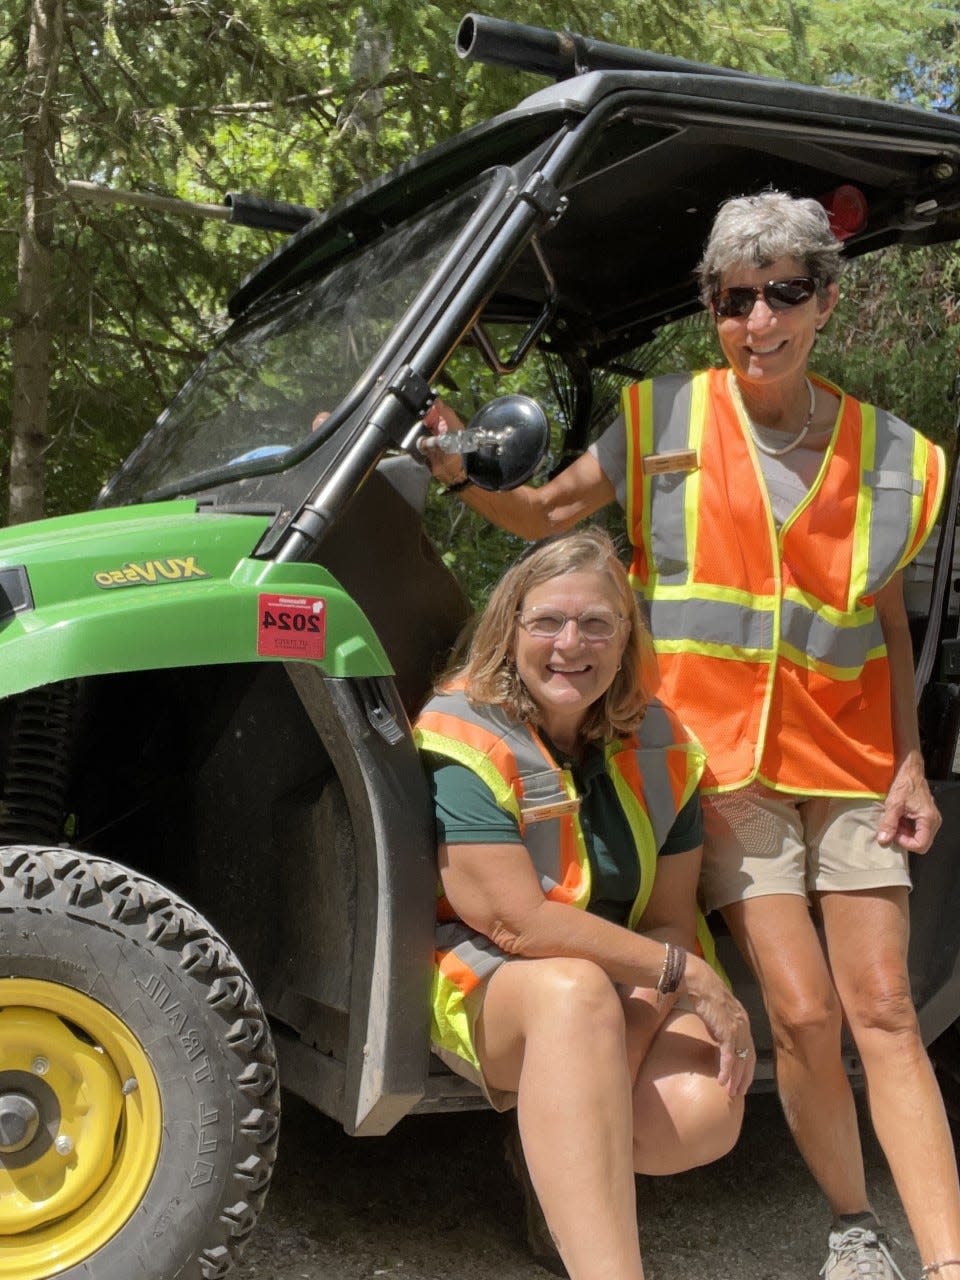 Nancy Gilliom, left, and Heidi Wasson stand outside the Gator Utility Vehicle they use to get around while cleaning campsites as volunteer camp hosts at Peninsula State Park in Fish Creek.